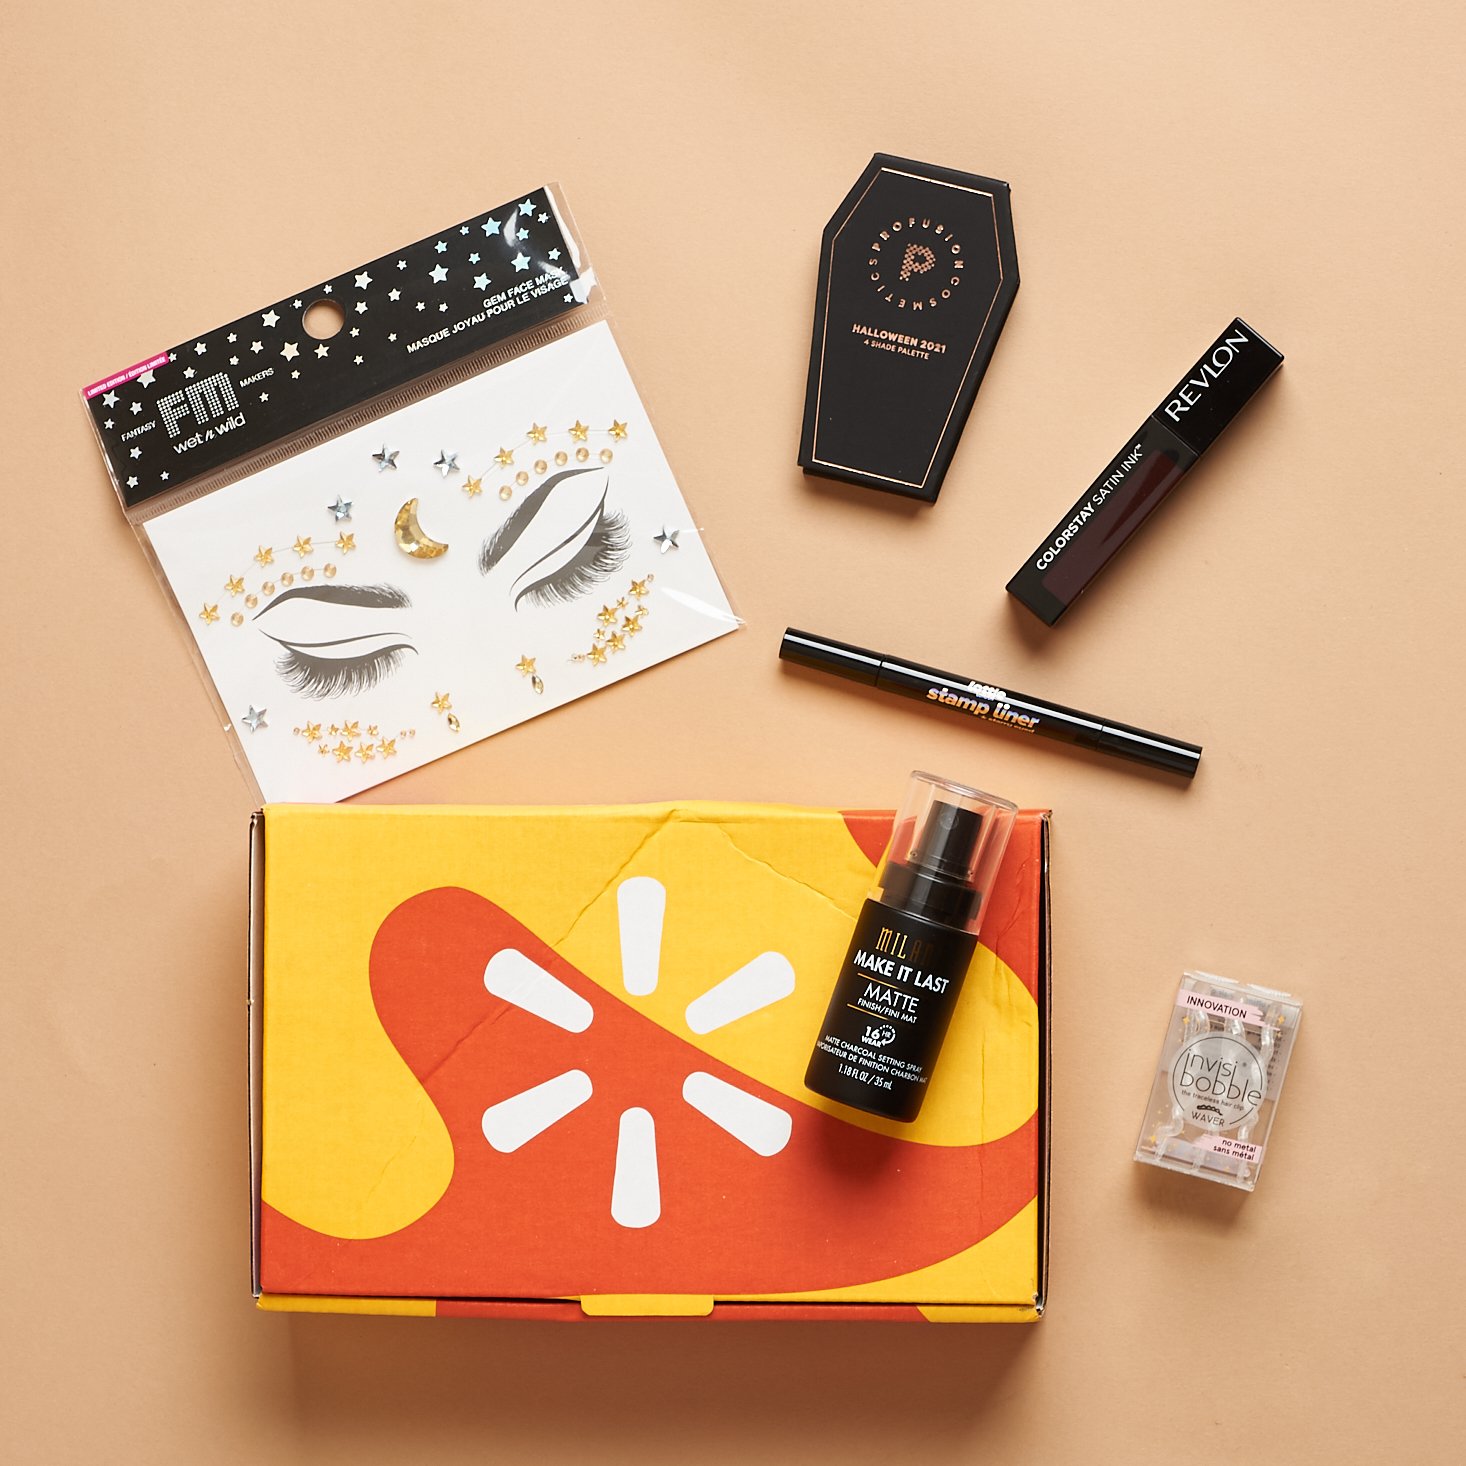 Walmart Limited Edition Halloween Beauty Box Review – October 2021